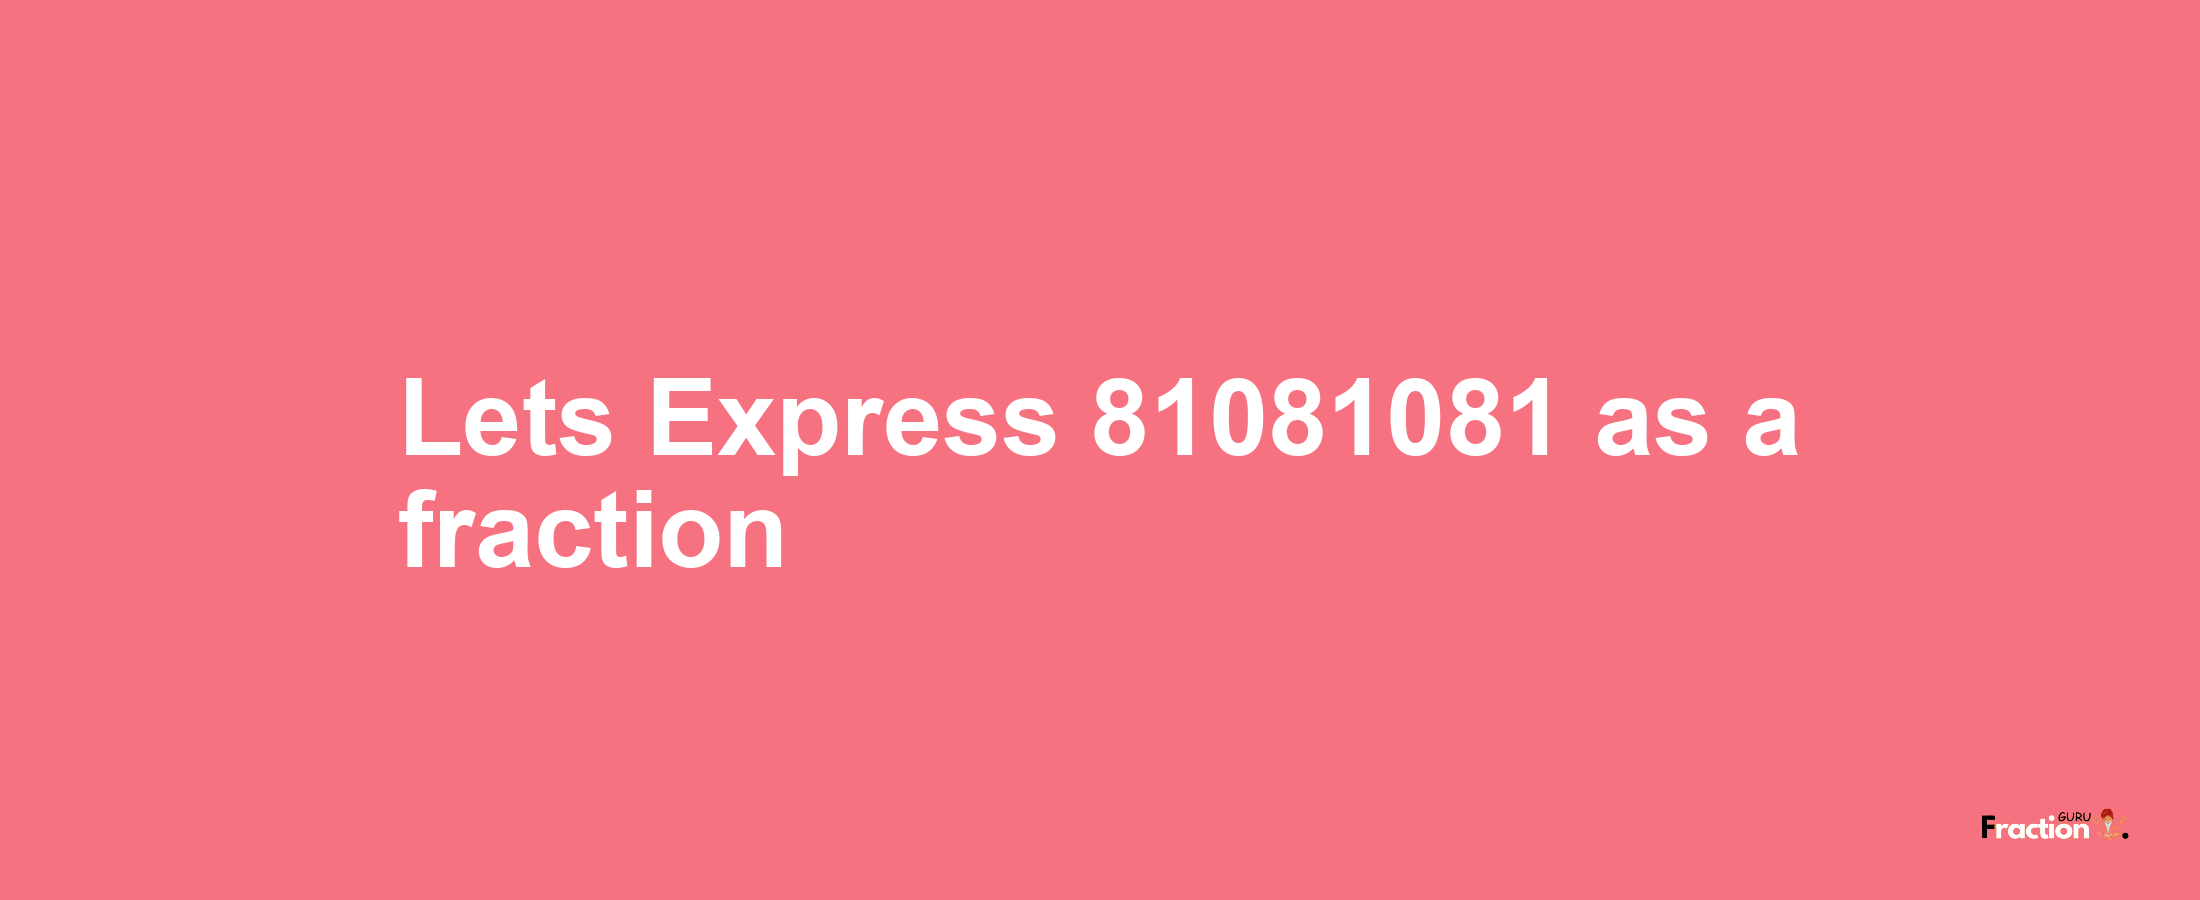 Lets Express 81081081 as afraction